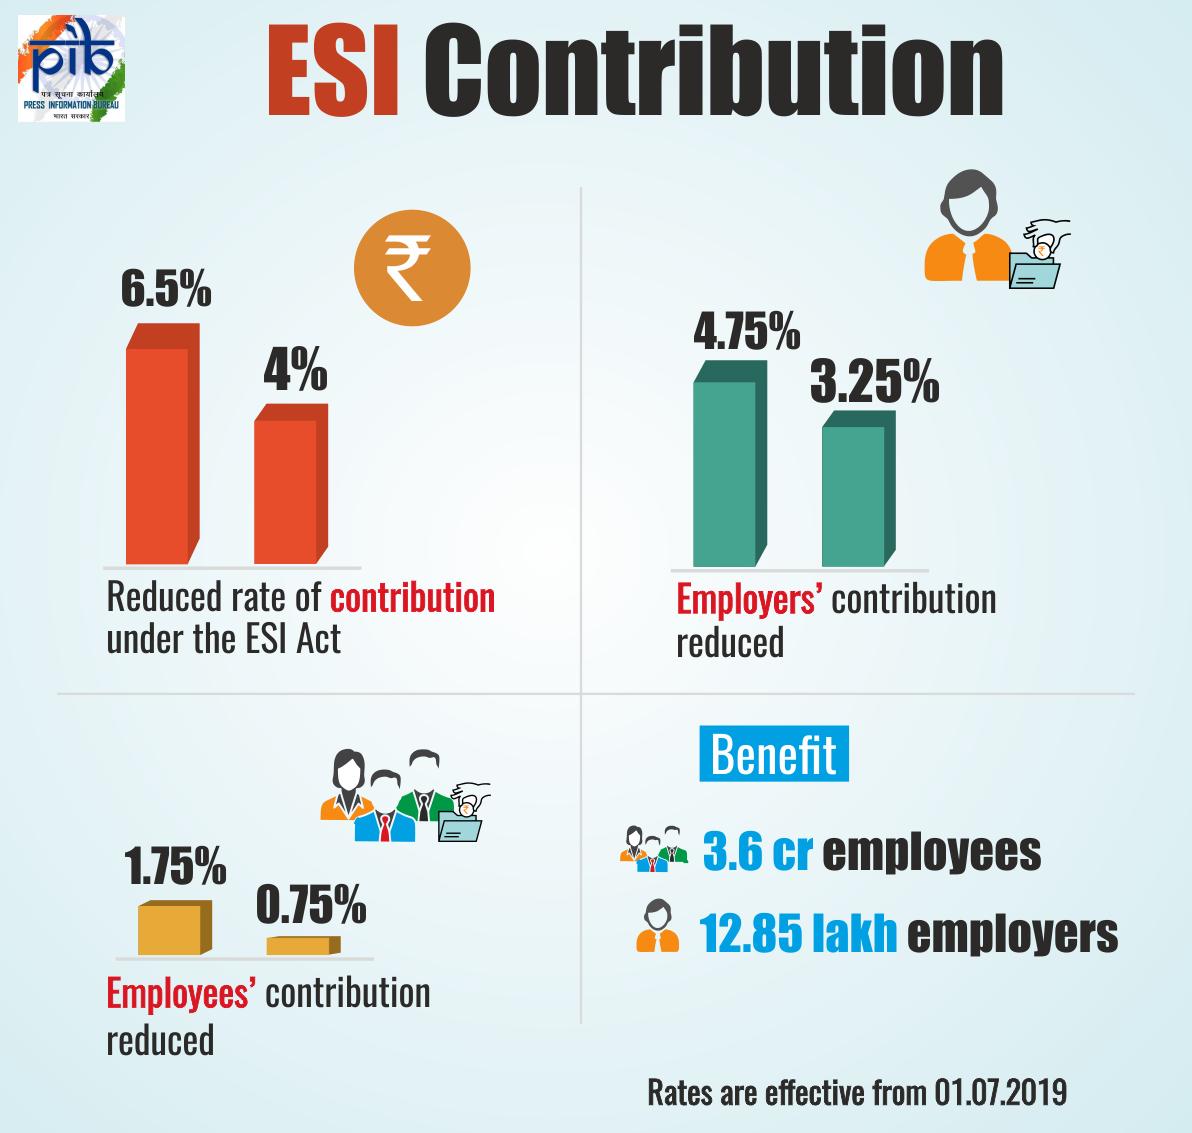 Govt. reduces the Rate of ESI contribution from 6.5% to 4%